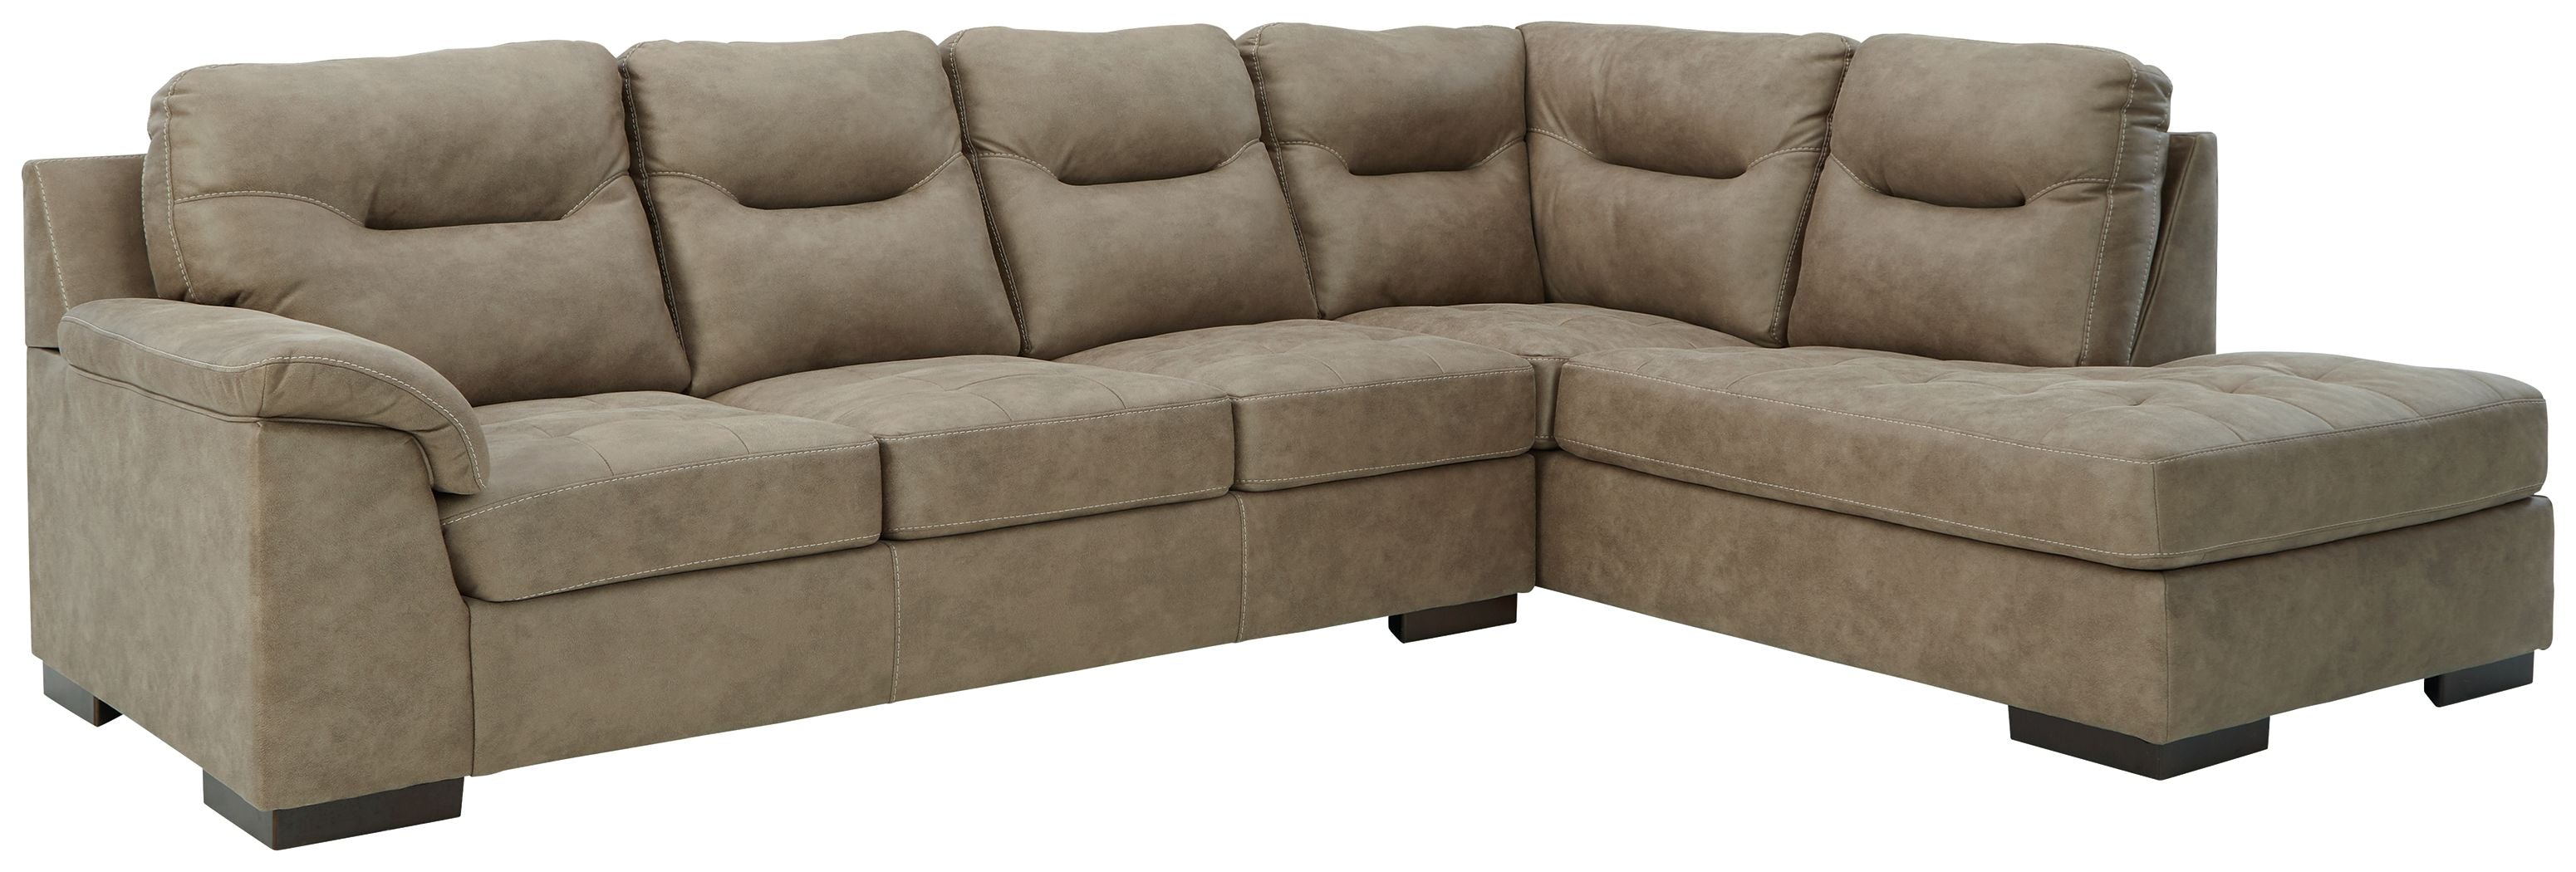 Maderla Faux Leather Sectional Sofa